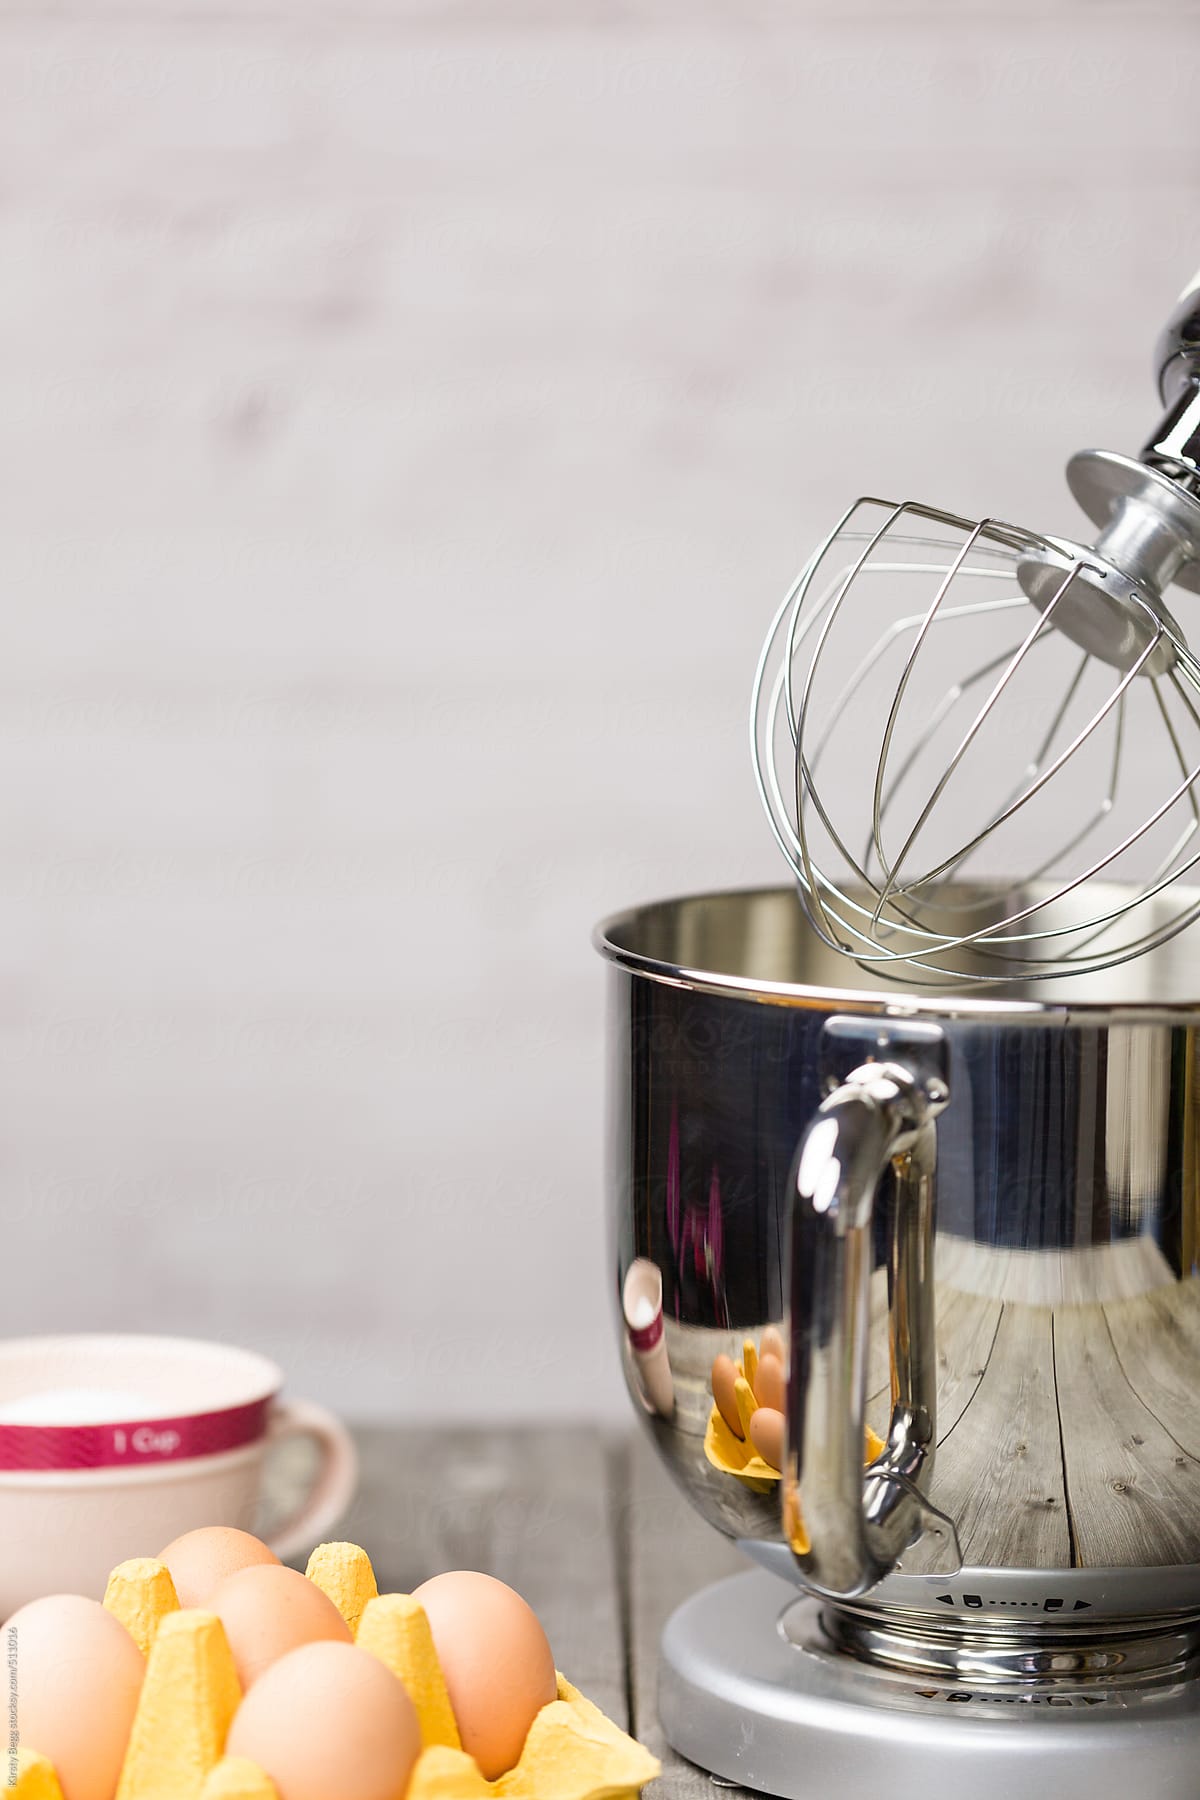 Whisk attachment on food mixer